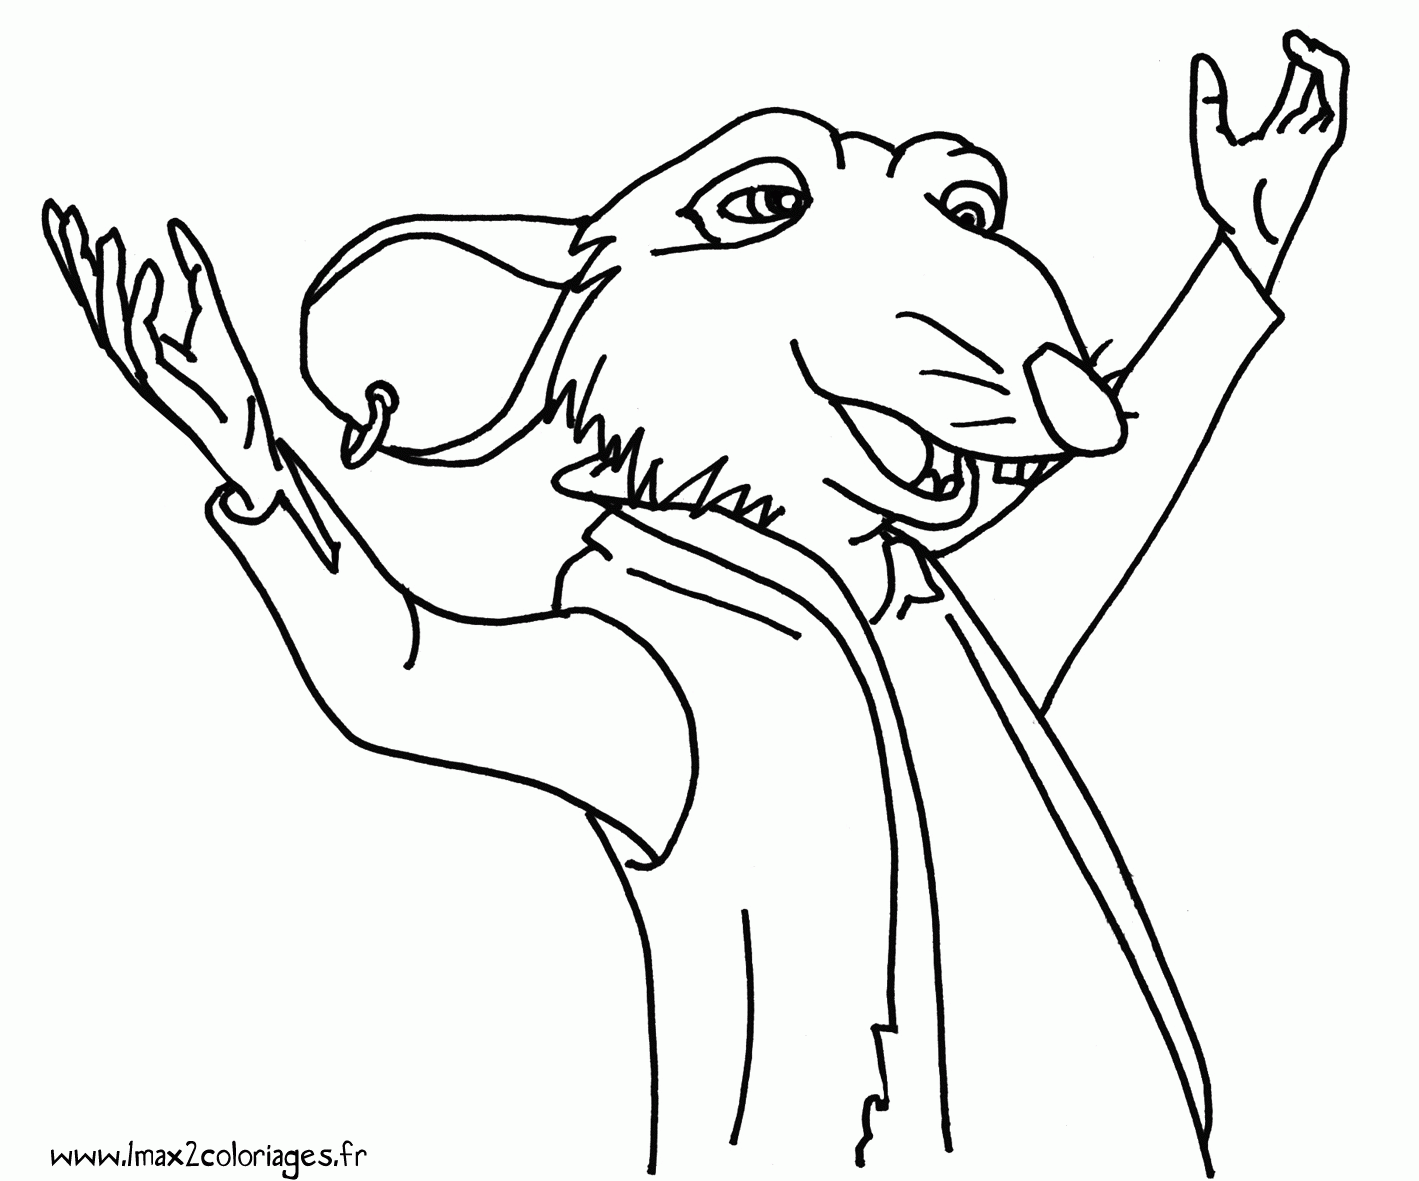 Tale Of Despereaux Coloring Pages Sketch Coloring Page